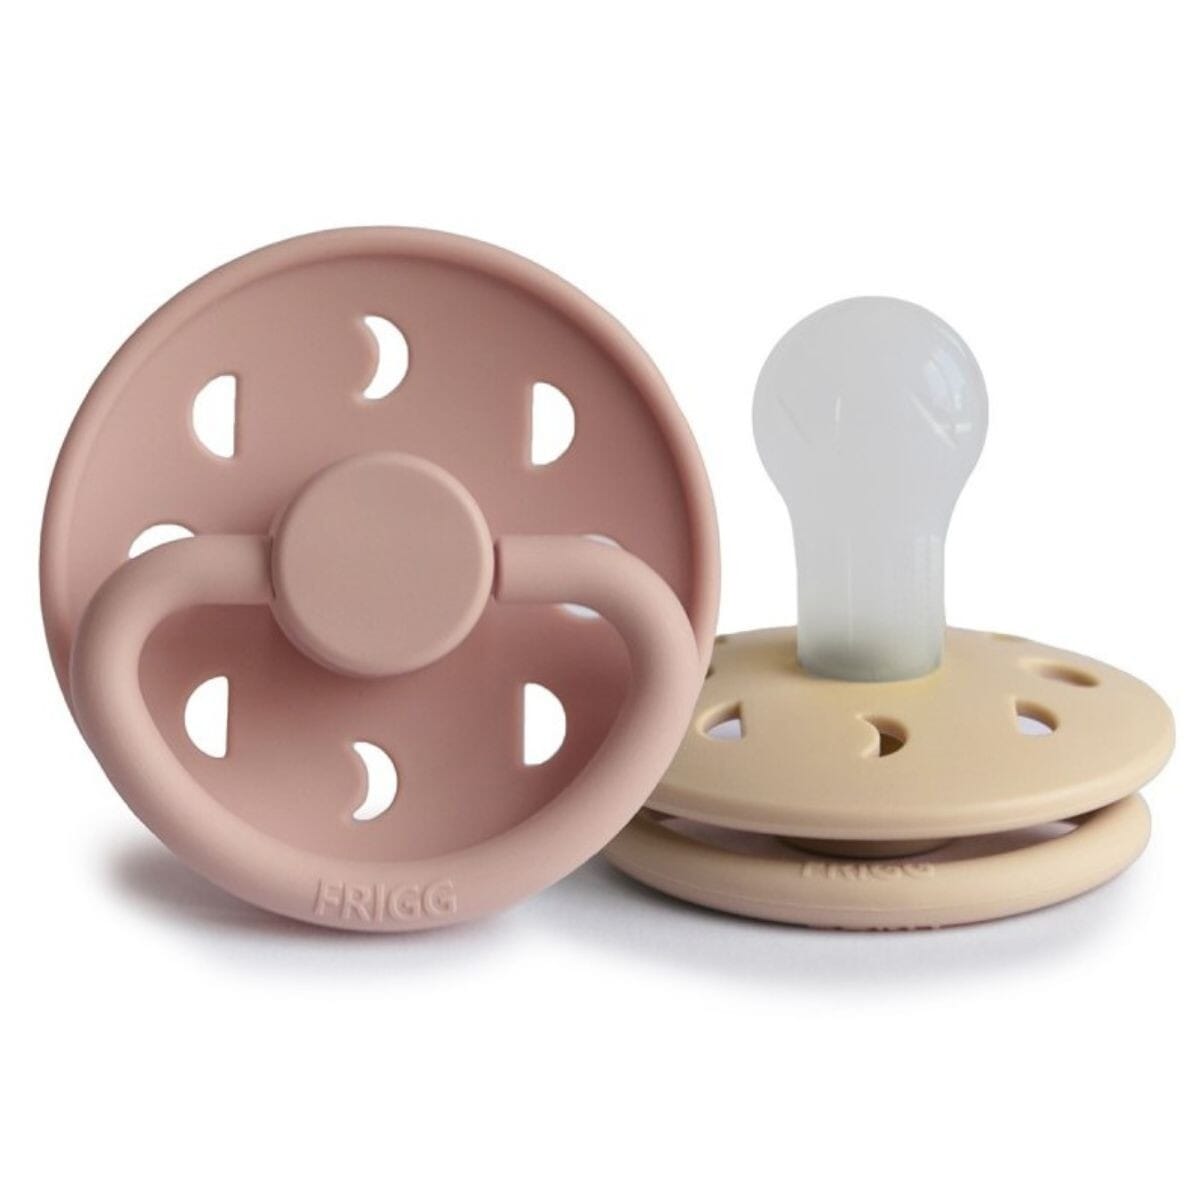 Sucette moon silicone blush/ croissant taille 2 - frigg 70.4302.36 5715239012094